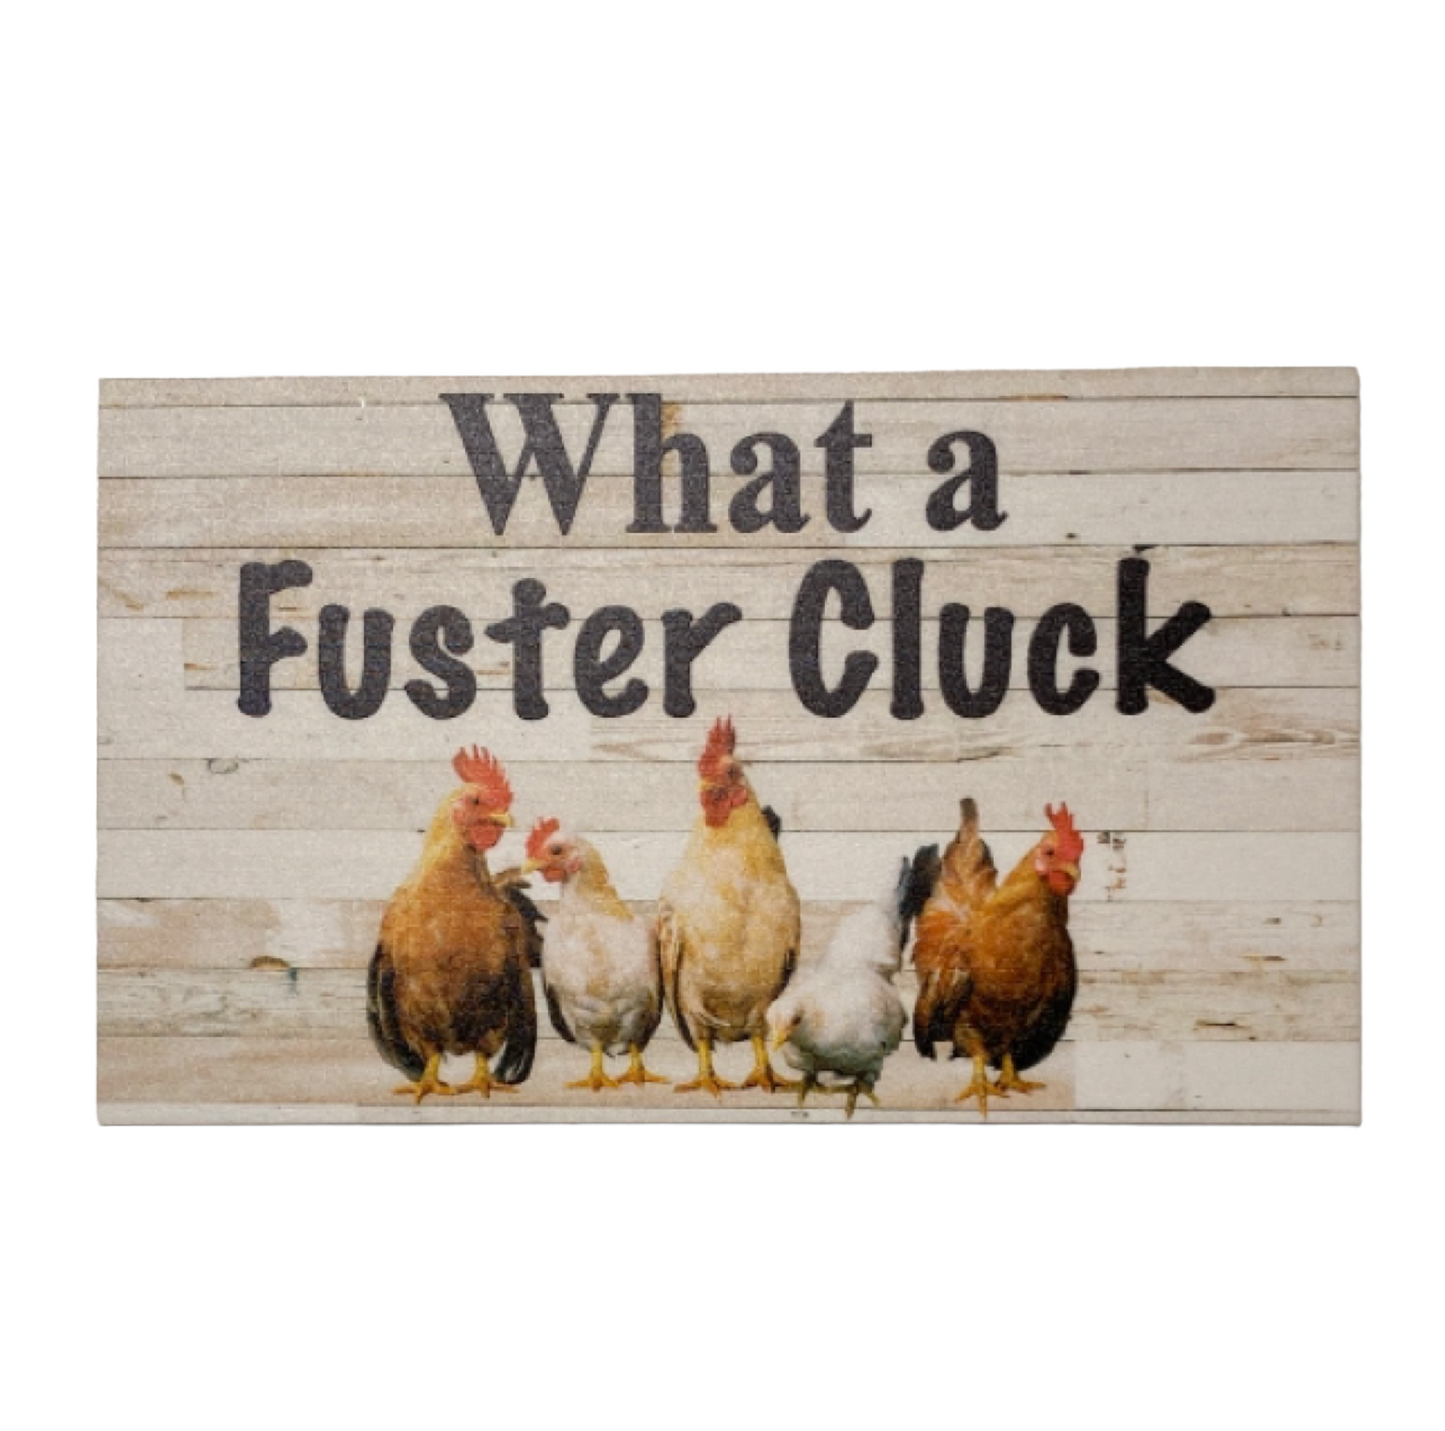 Fuster Cluck Chicken Rooster Funny Sign - The Renmy Store Homewares & Gifts 